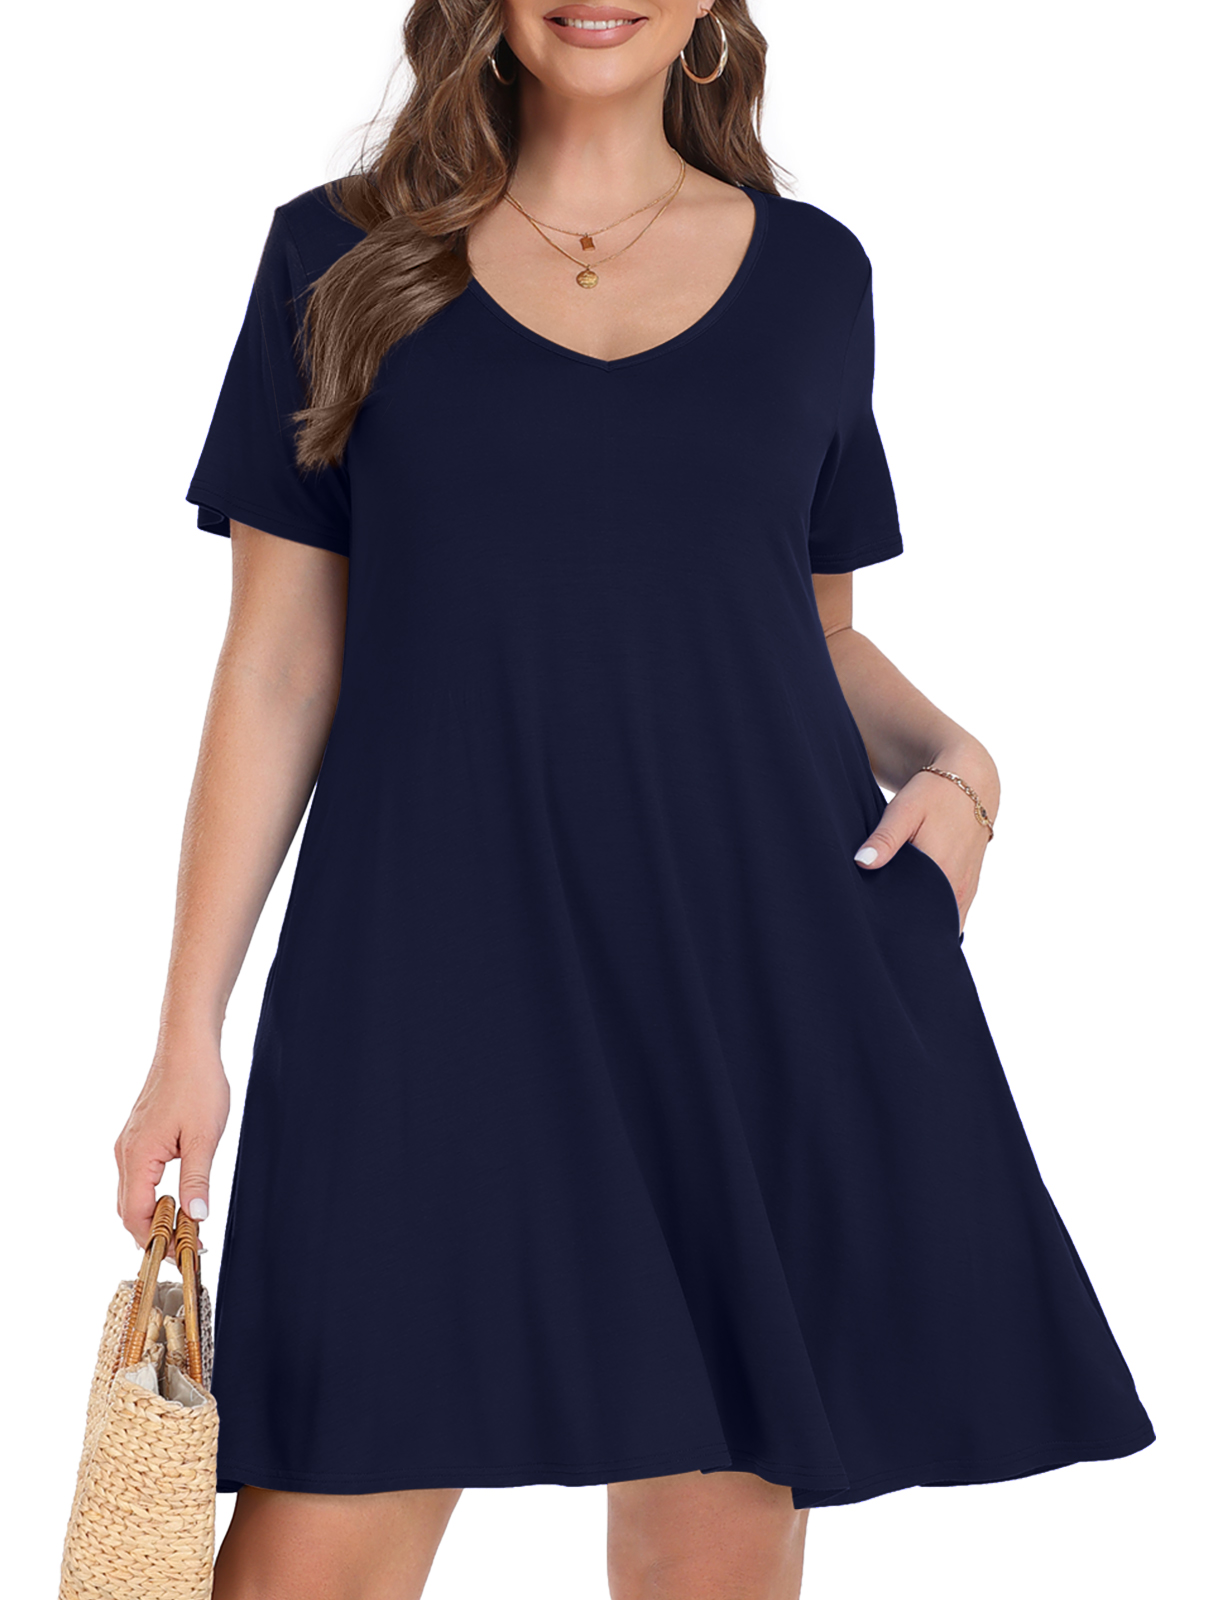 Plus Size Dresses for Women, VEPKUL V Neck T Shirt Dress 2024 Short Sleeve Casual Loose Swing Summer Dress with Pockets - image 1 of 9